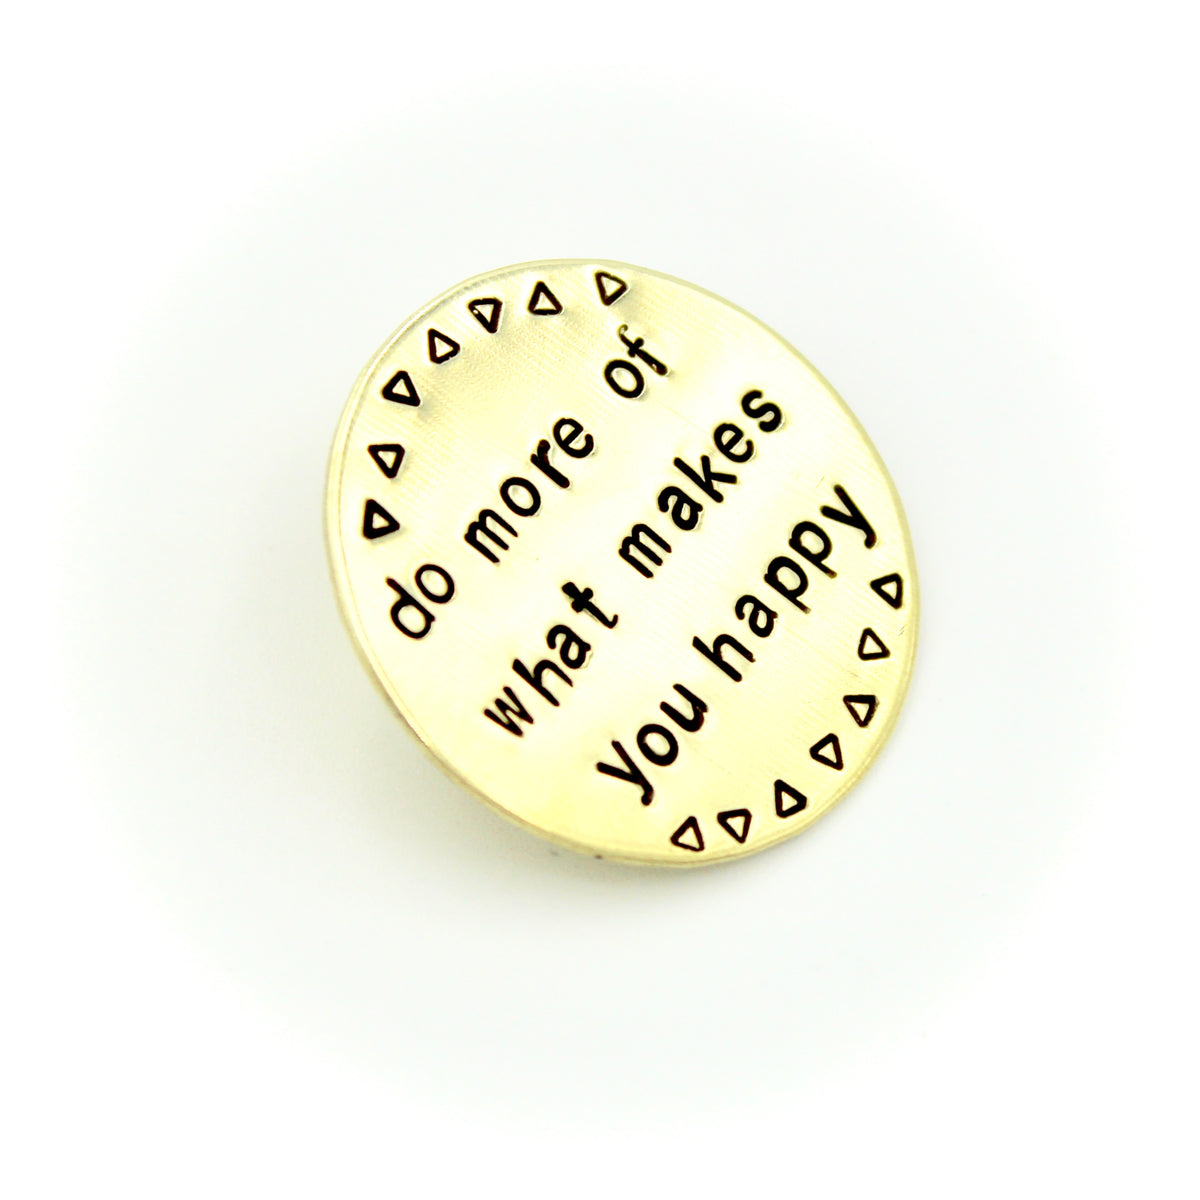 Do More Of What Makes You Happy Pin